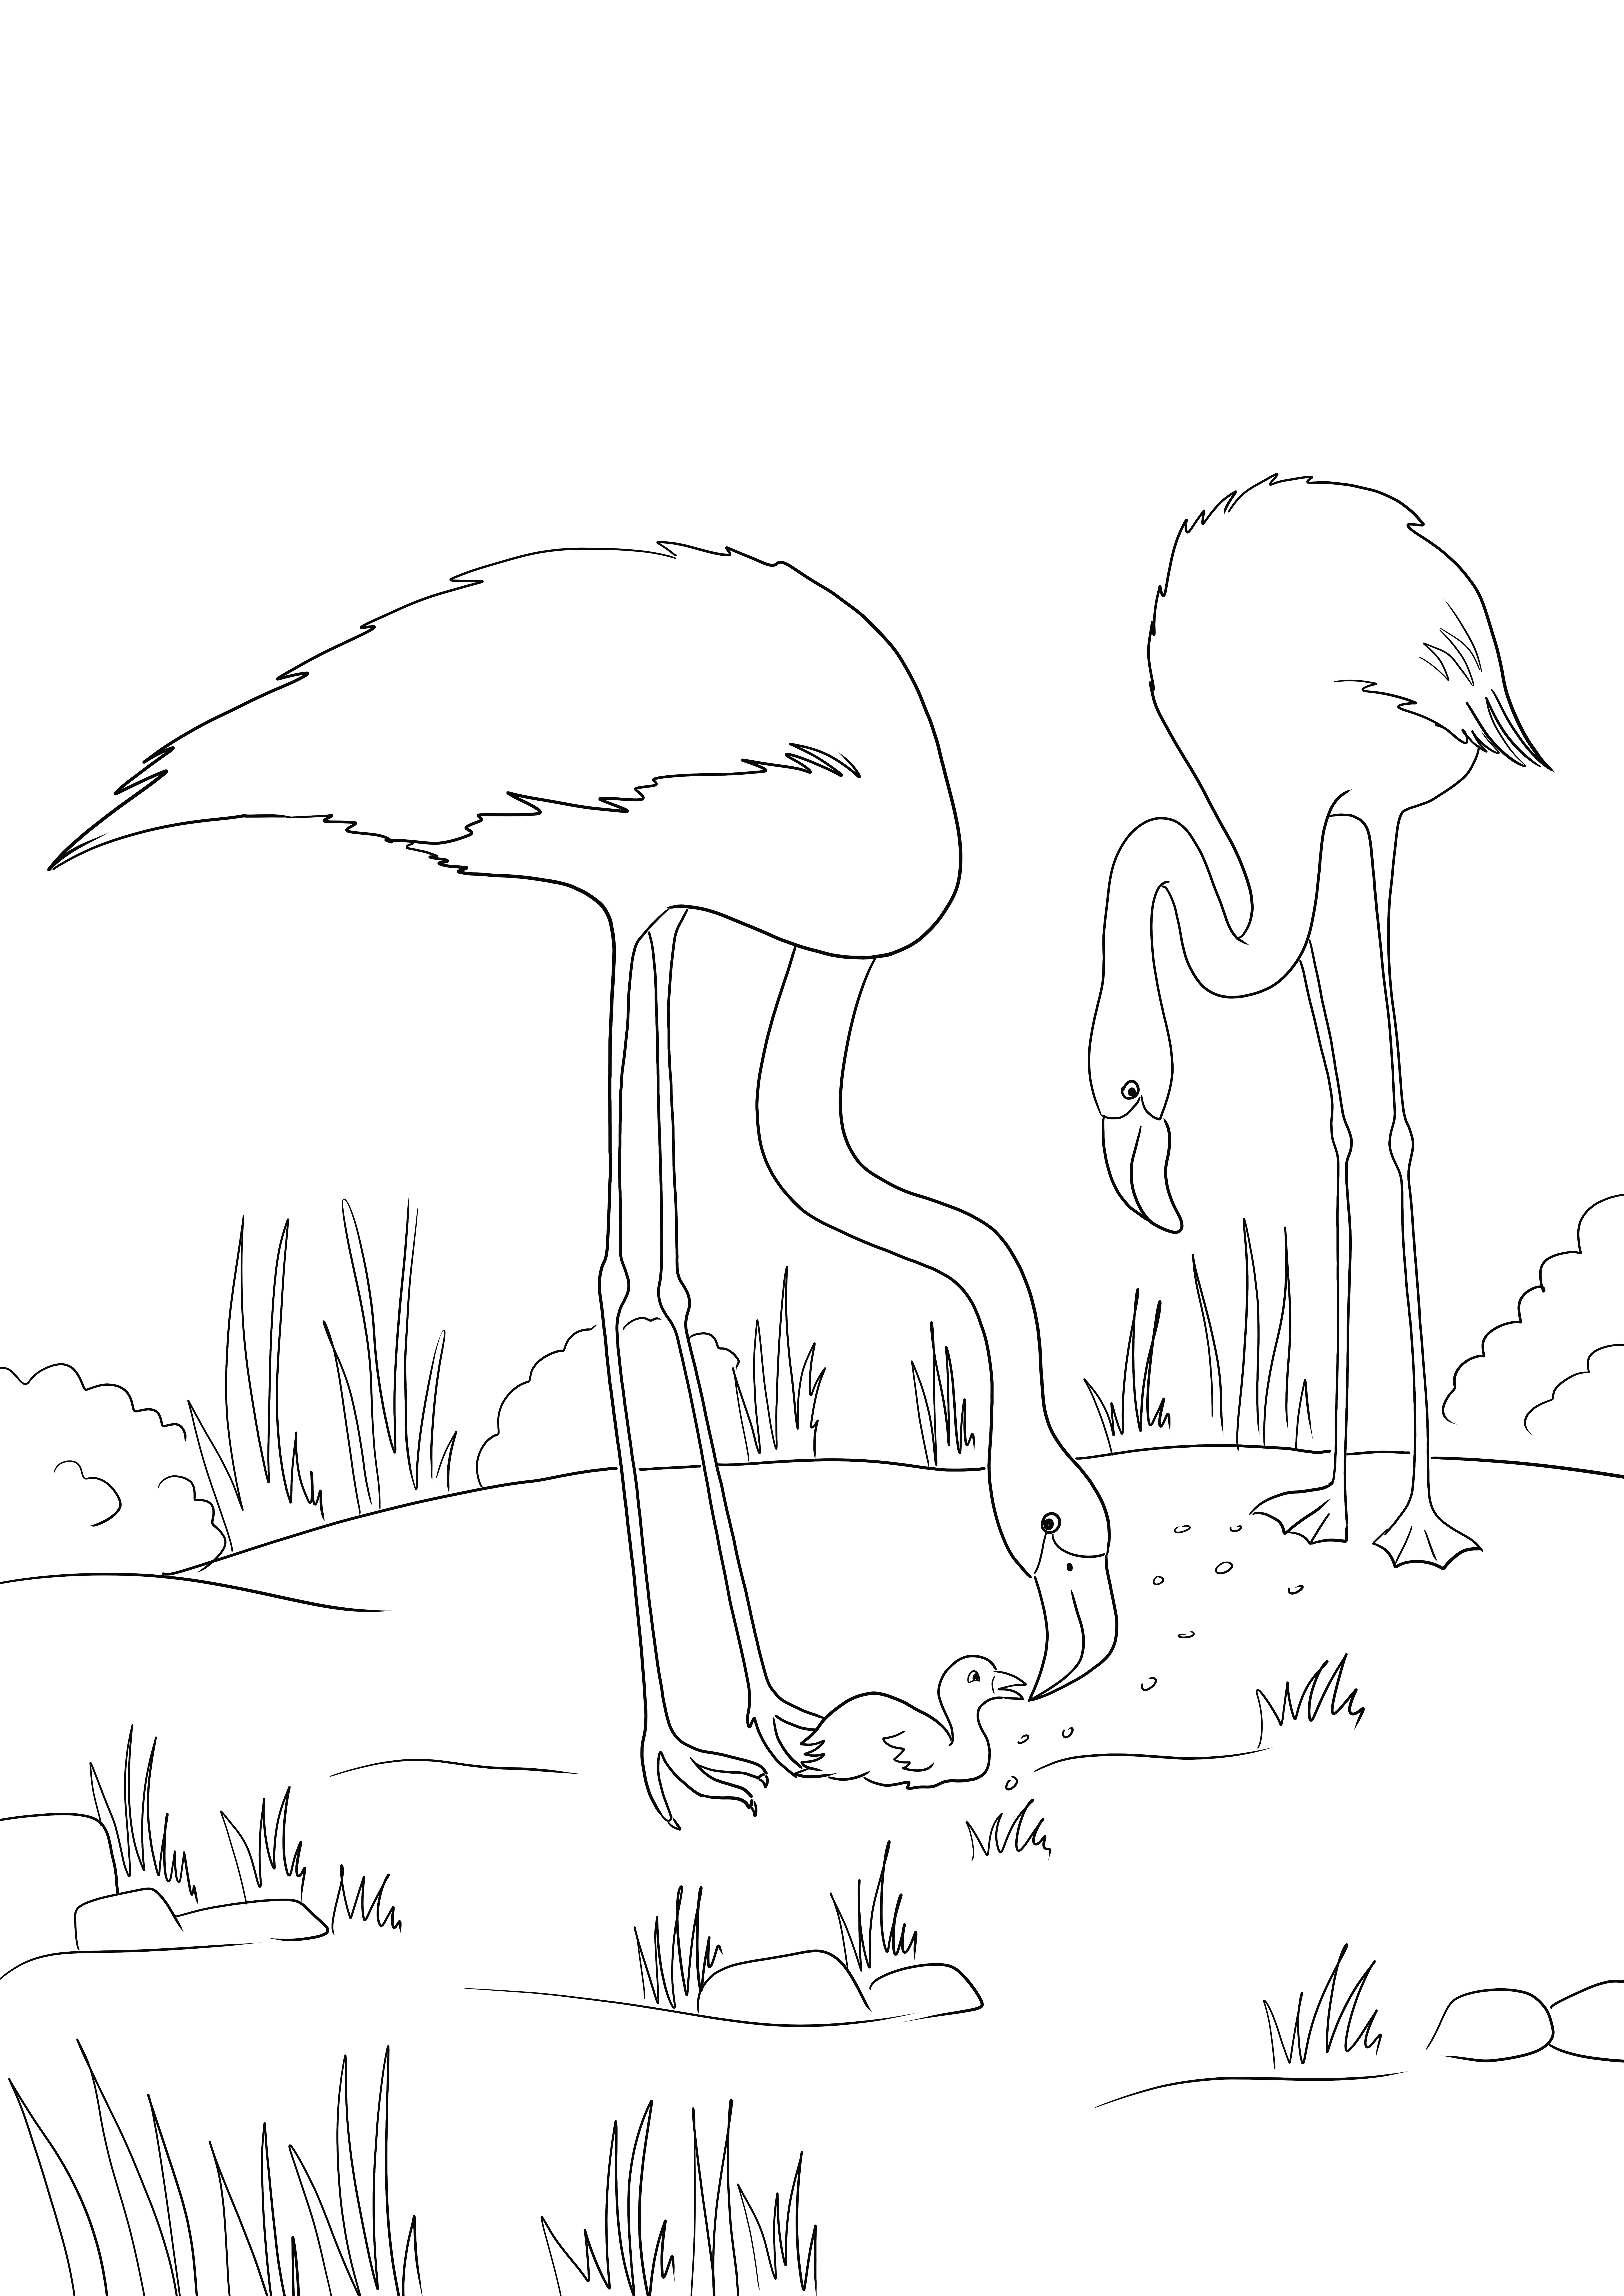 Flamingo with Baby Flamingo coloring sheet free to download and save